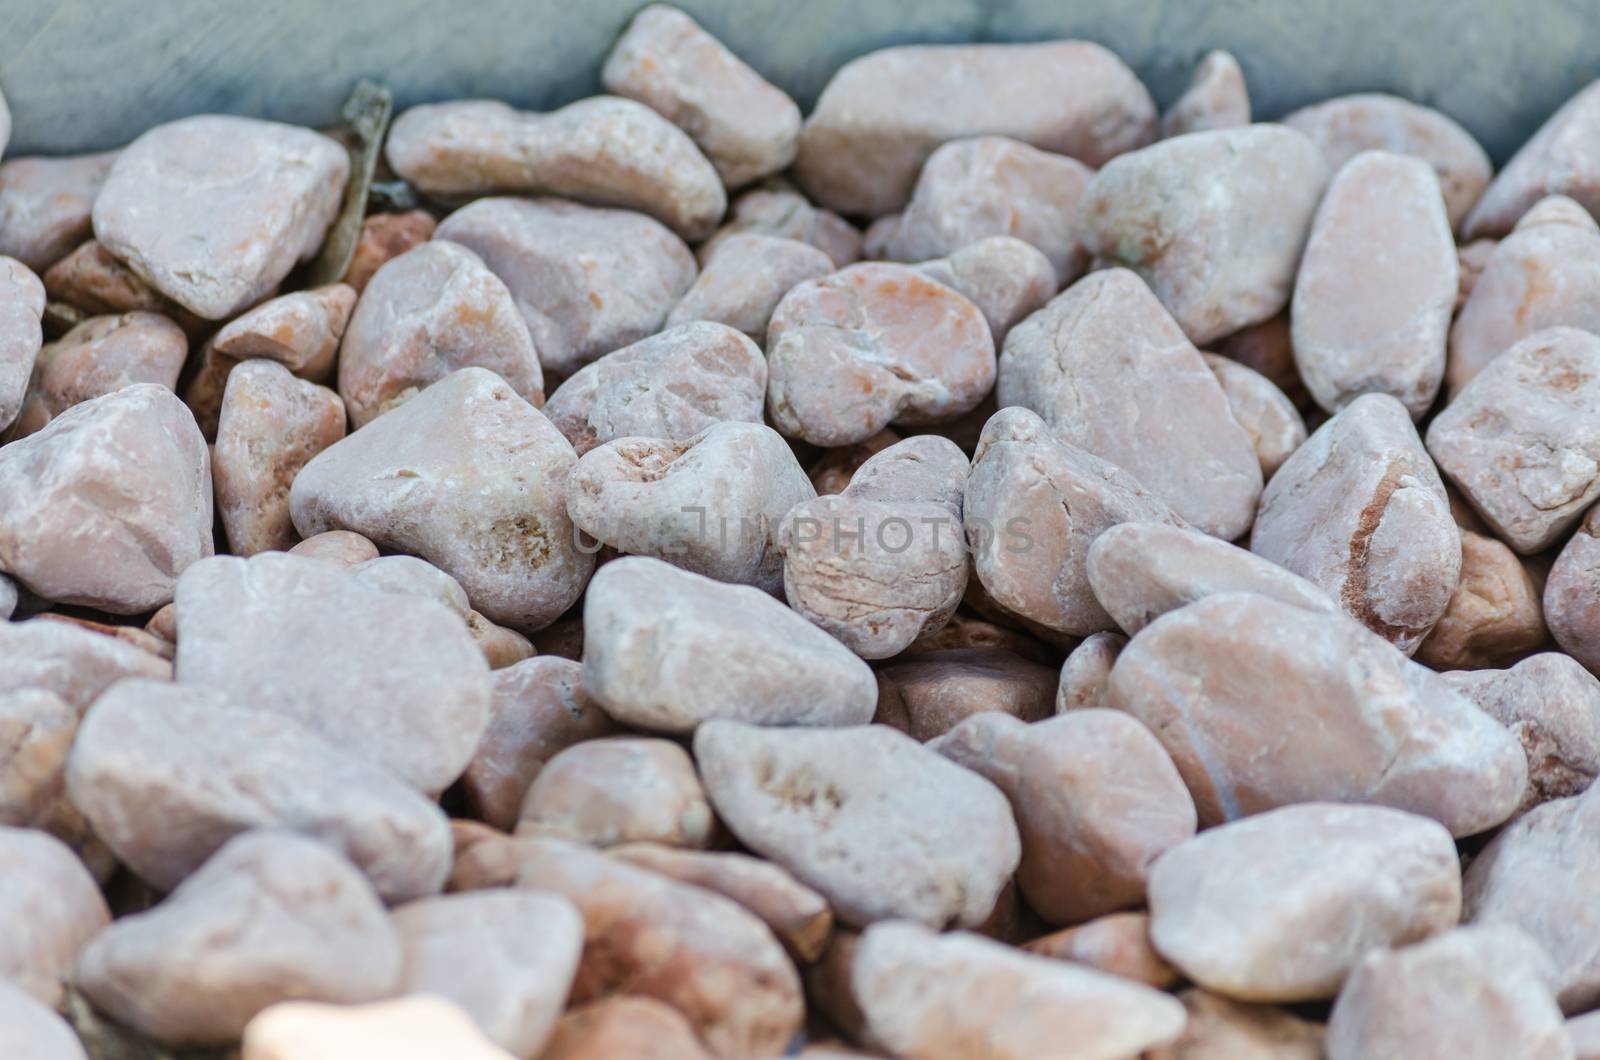 Storage space of various sandstone, natural stone, quarry stone and bulk varieties and species.
